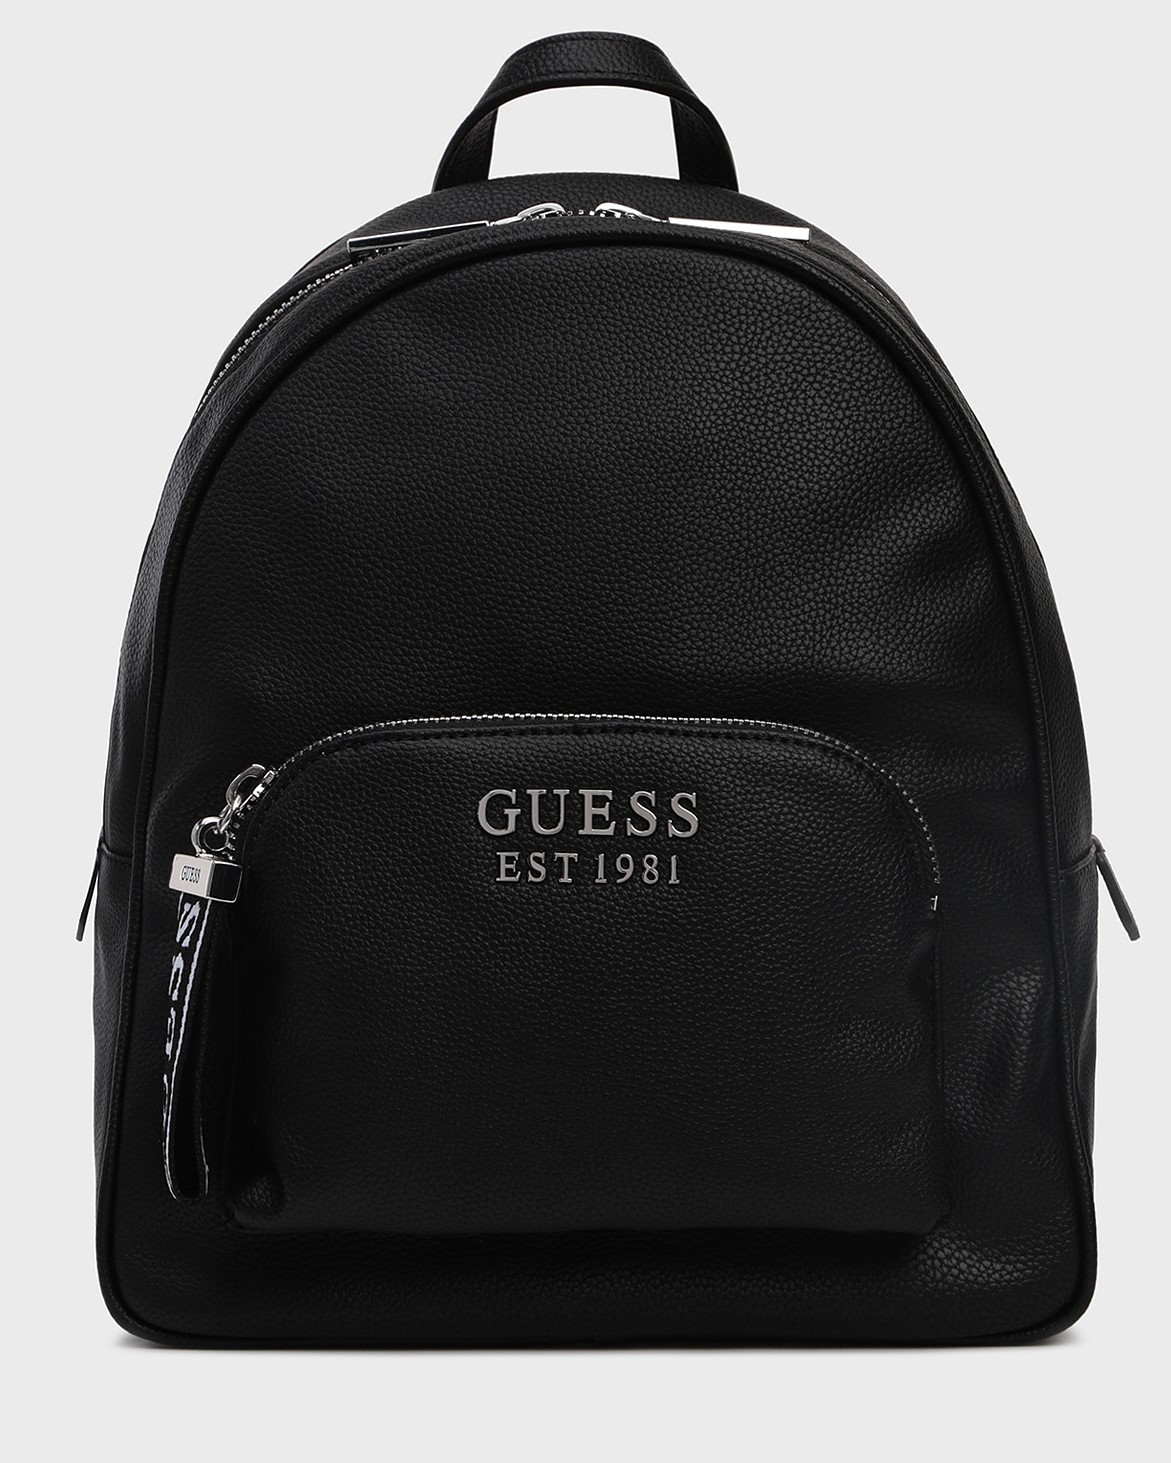 BALO GUESS BACKPACK 12